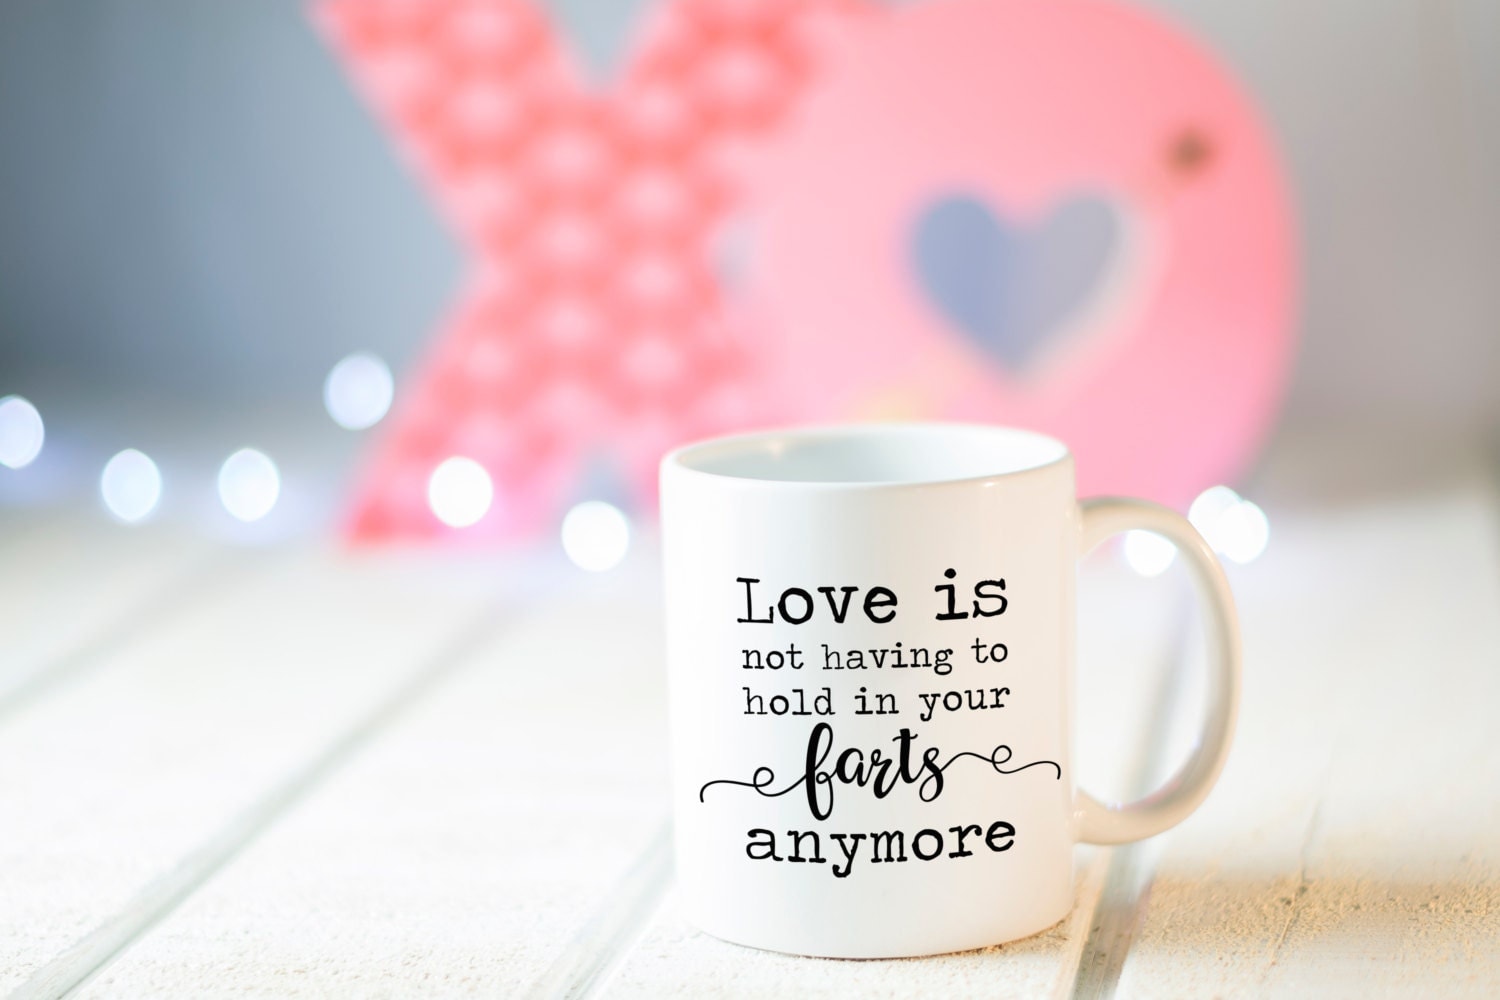 Funny Gifts Couples, love is not having to hold in your farts anymore, Funny Valentine's Day Gift, Funny Mug, Gift for Him, Girlfriend Gift